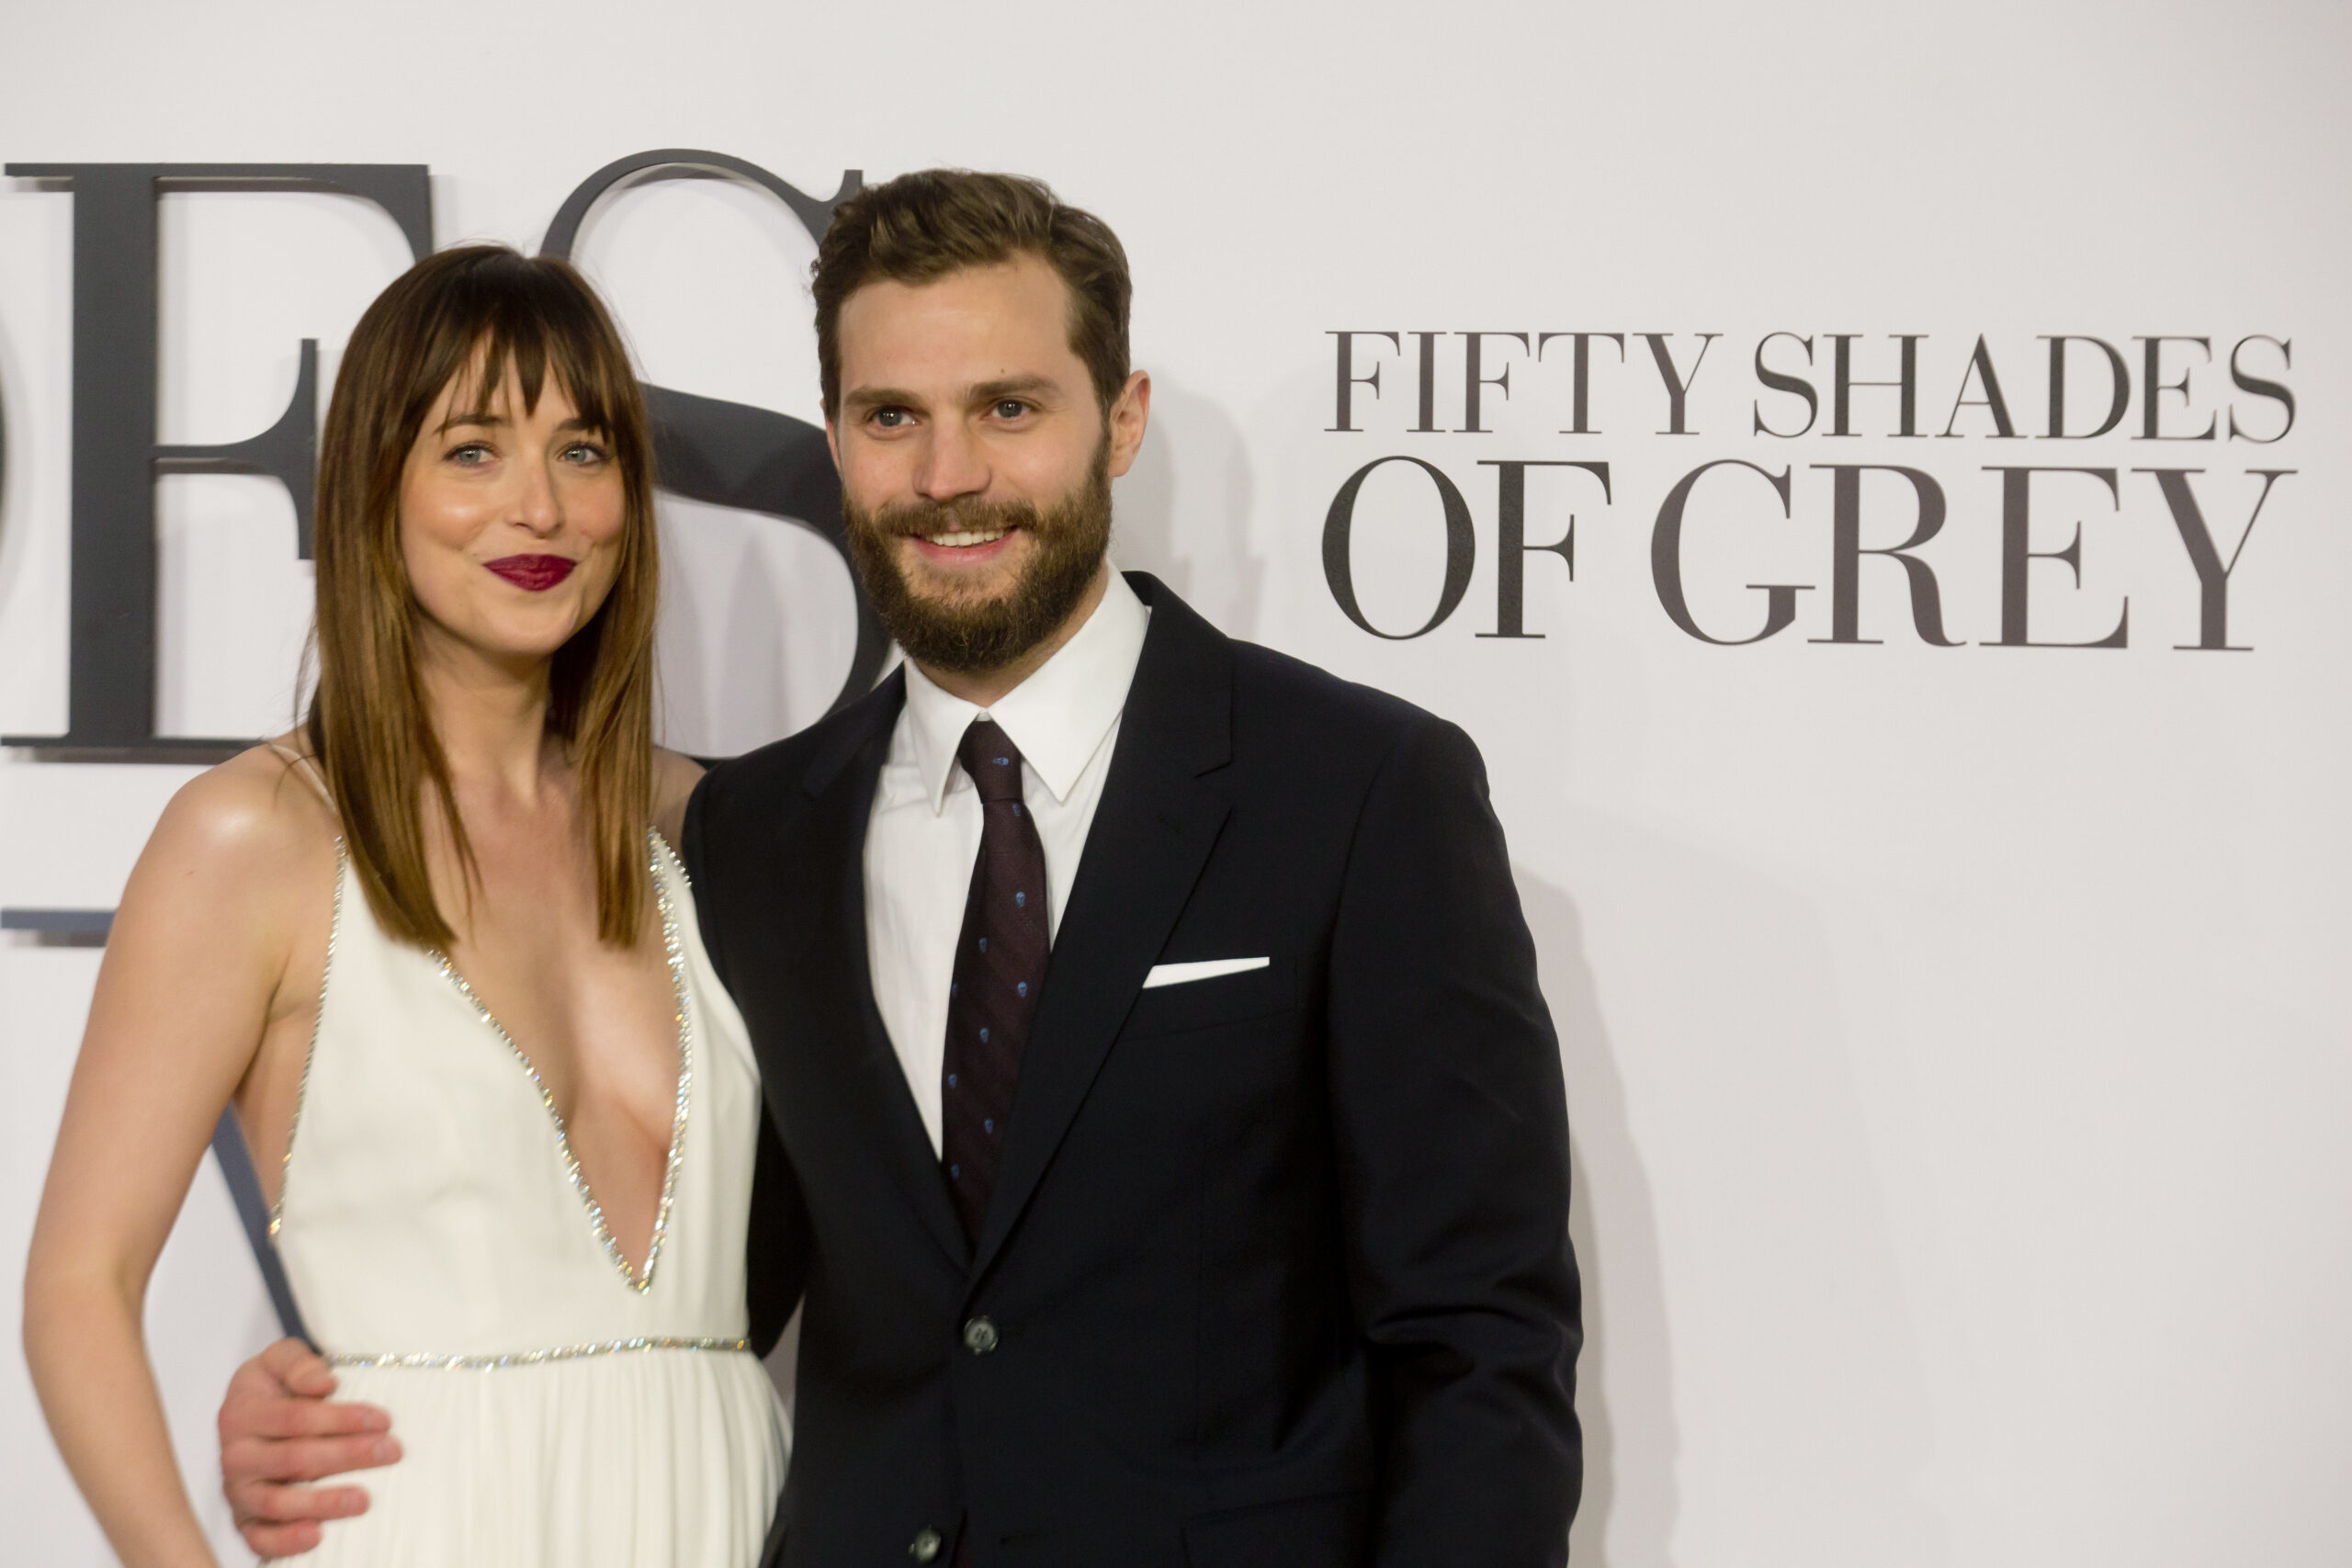 Fifty Shades of Grey inspires women to spice things up in bedroom